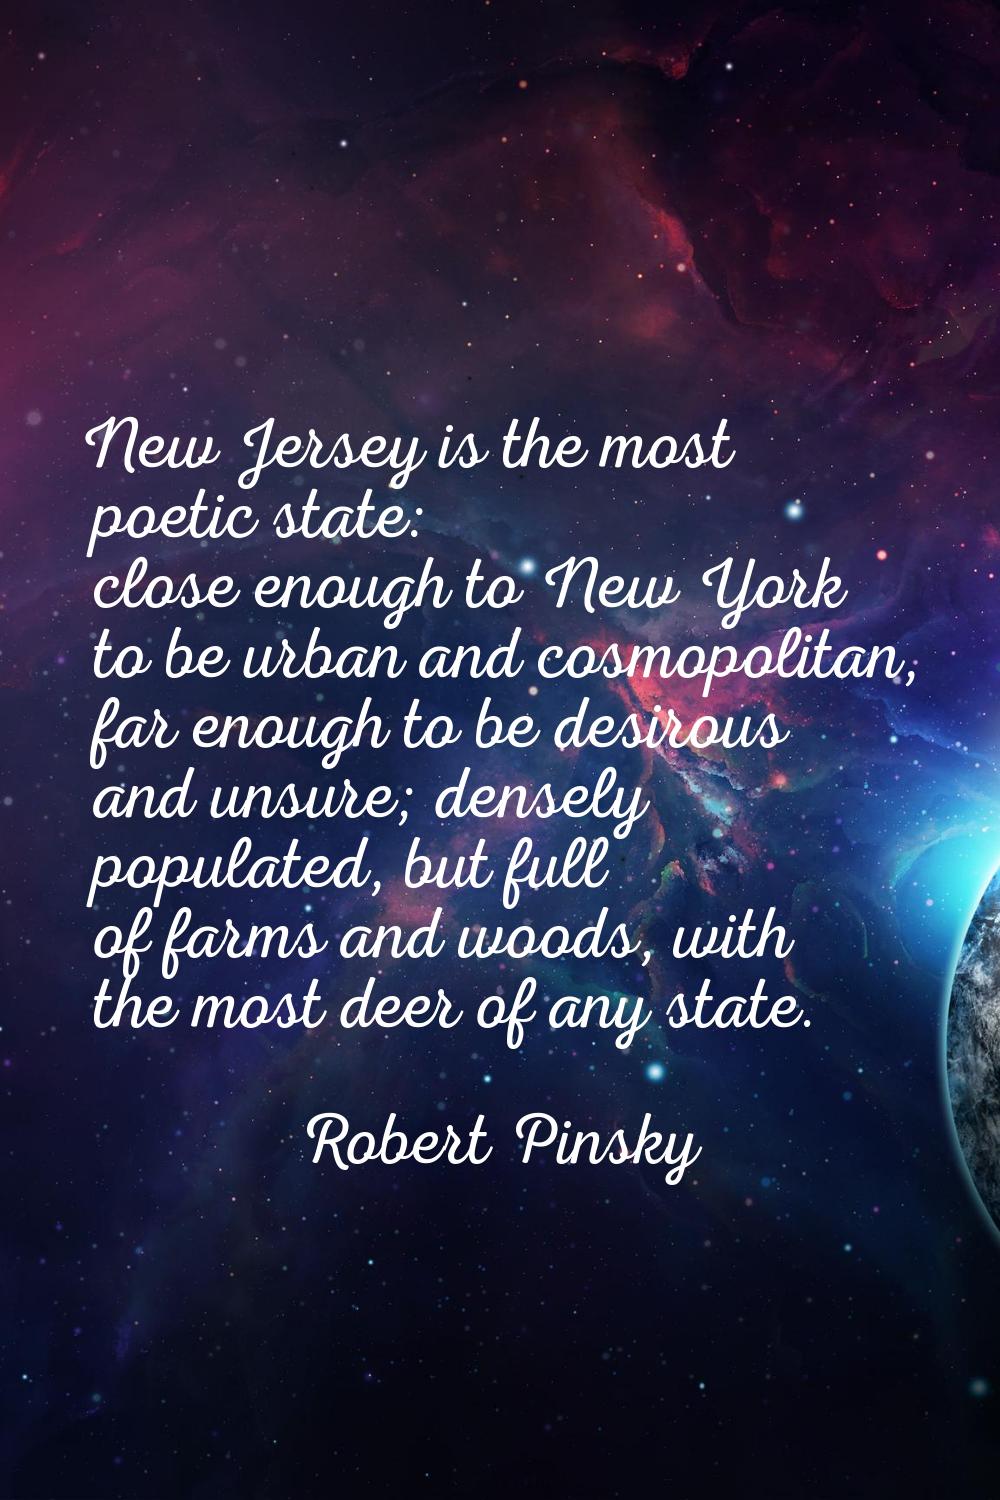 New Jersey is the most poetic state: close enough to New York to be urban and cosmopolitan, far eno